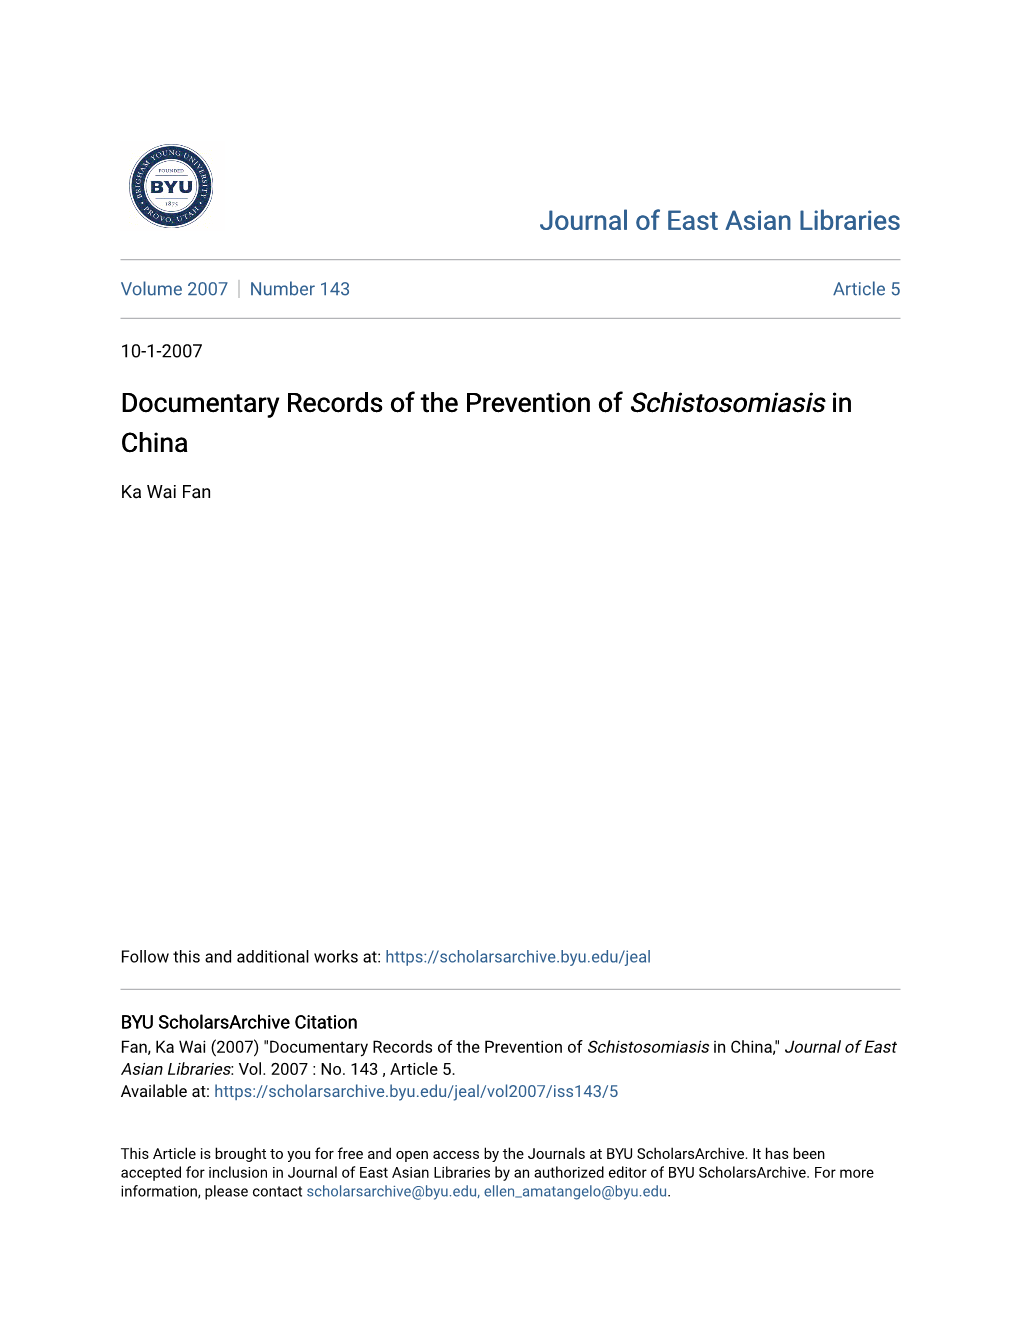 Documentary Records of the Prevention of Schistosomiasis in China